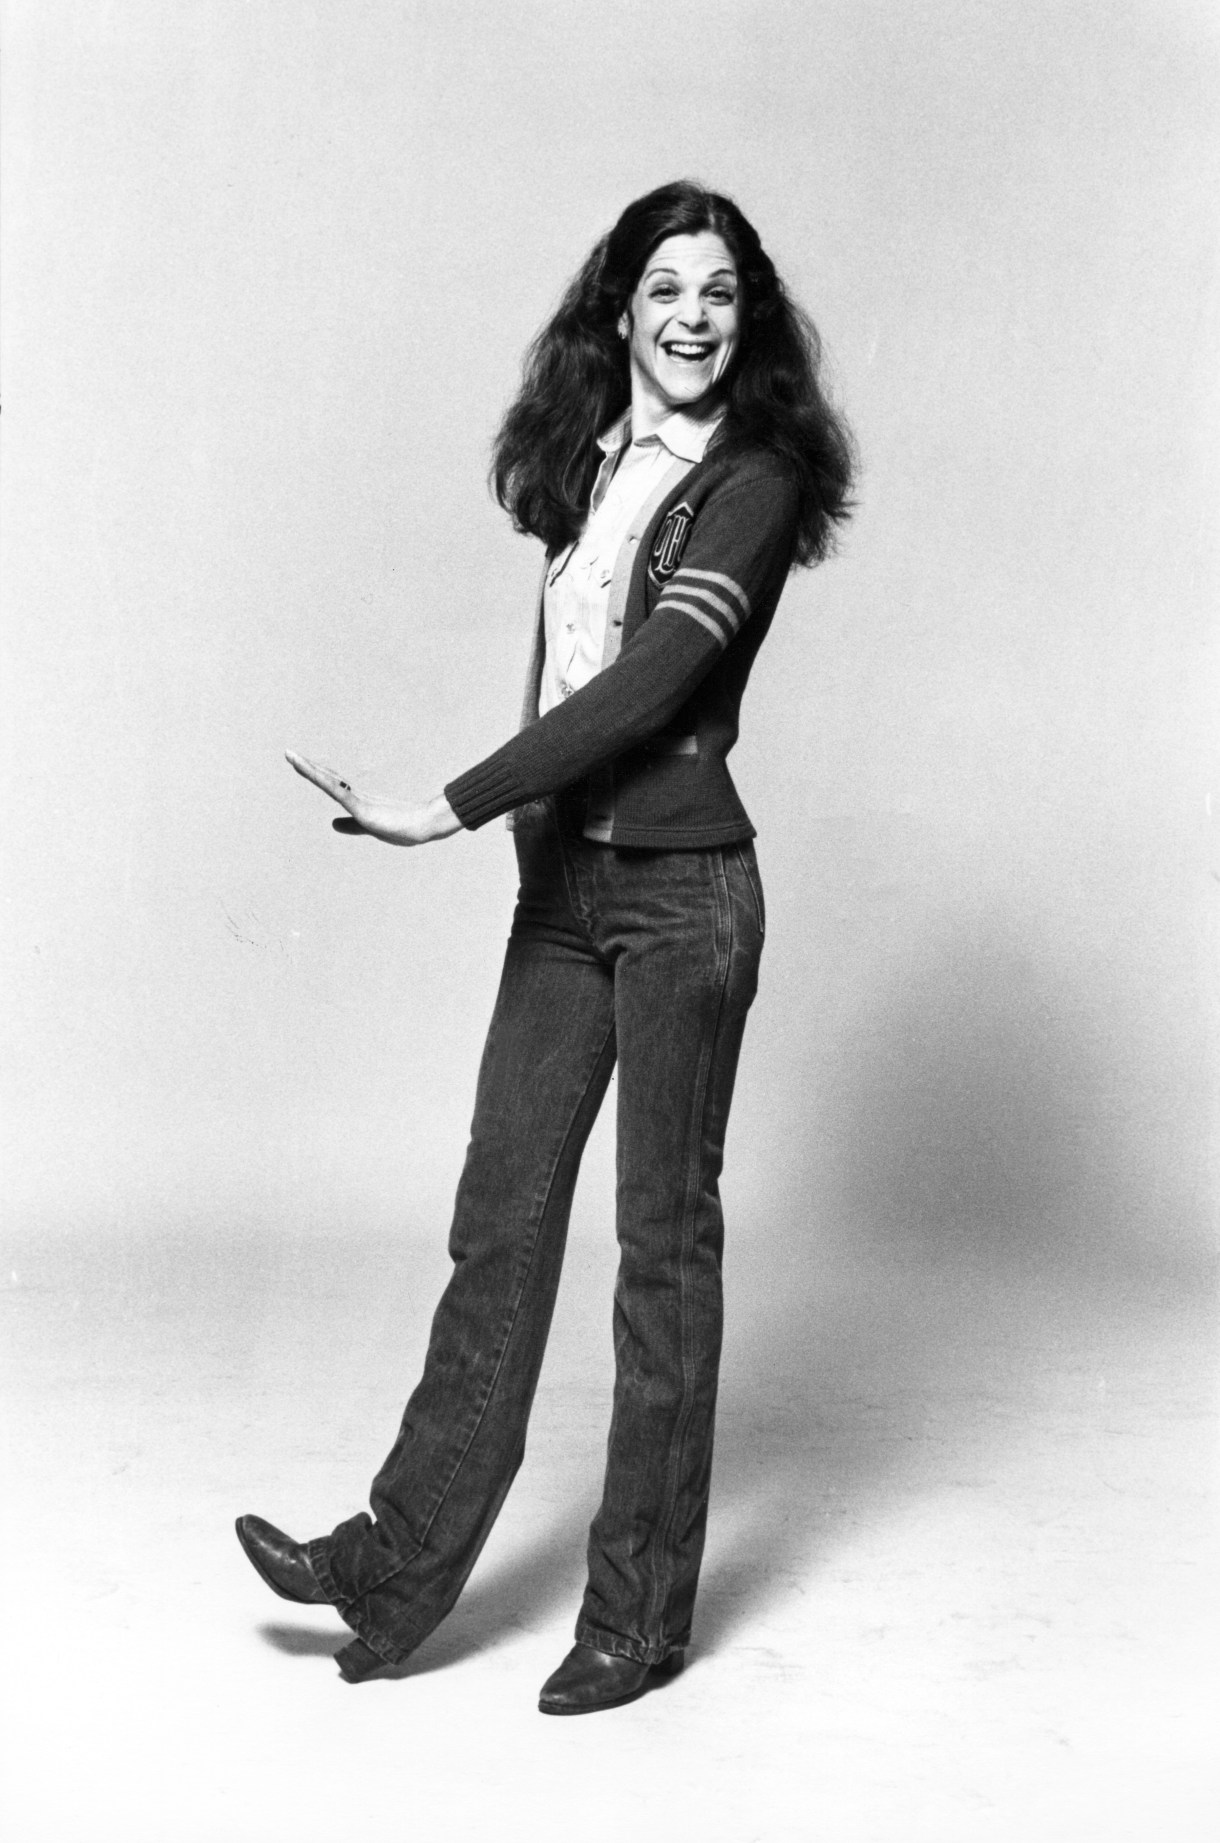 Portrait of American actress and comedienne Gilda Radner (1946 - 1989) as she poses against a white background, New York, New York, late 1970s. 